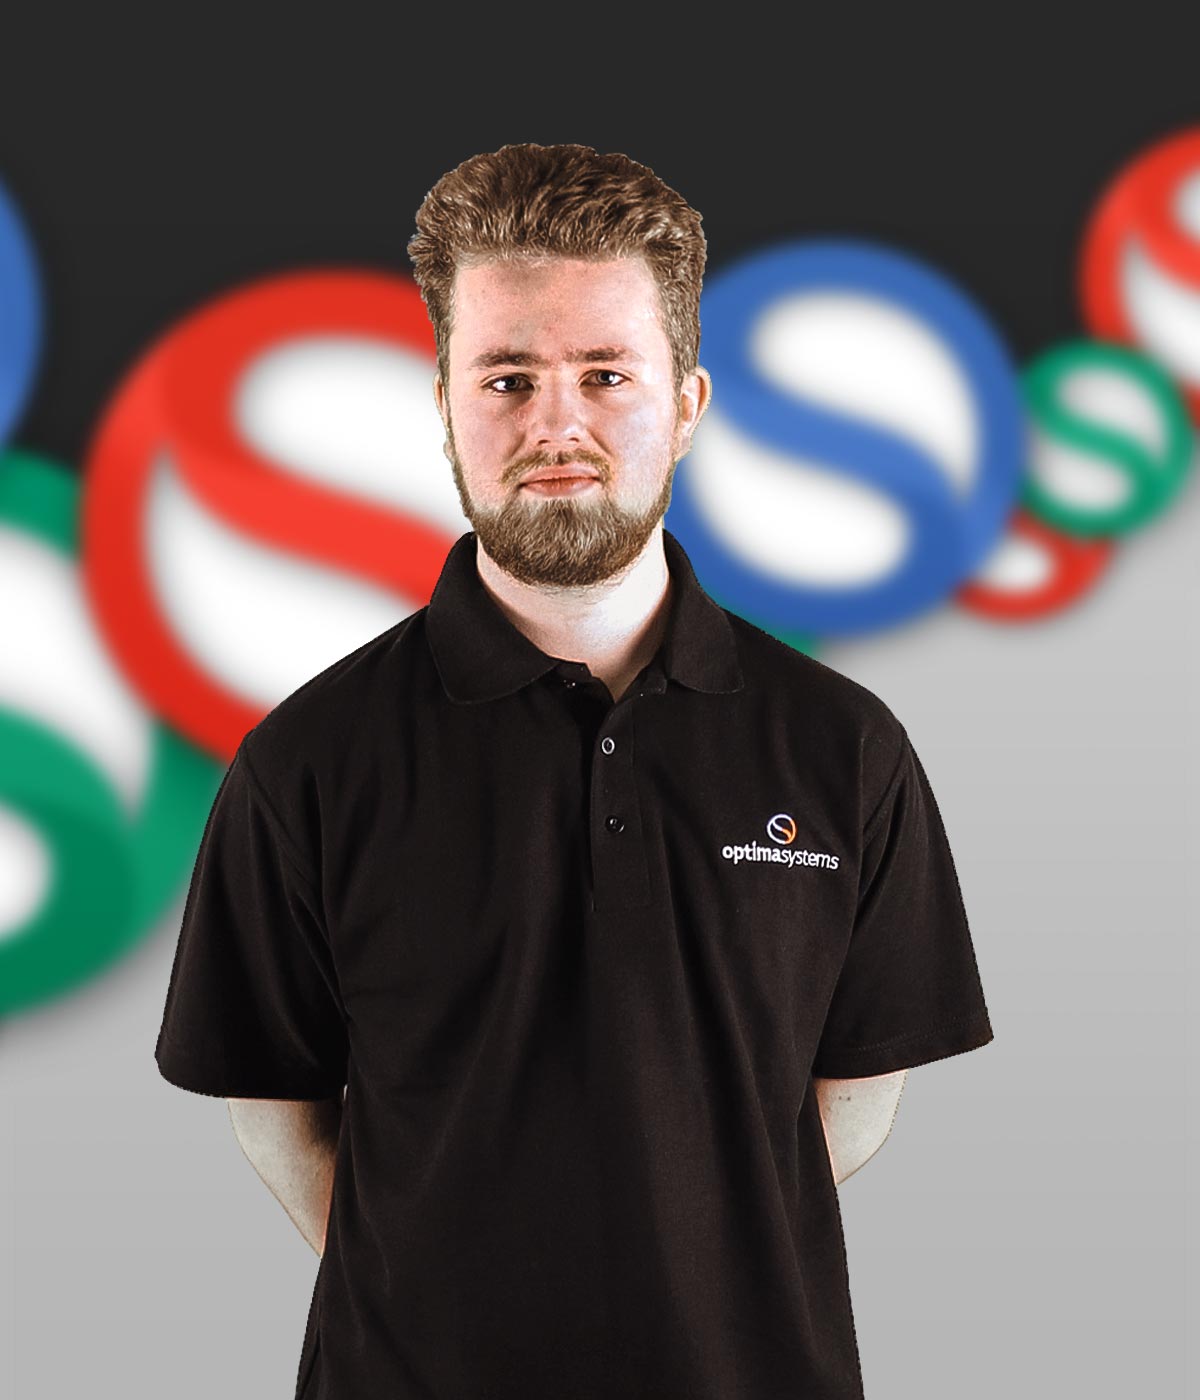 Tristan Williams - Network Engineer, Optima Systems